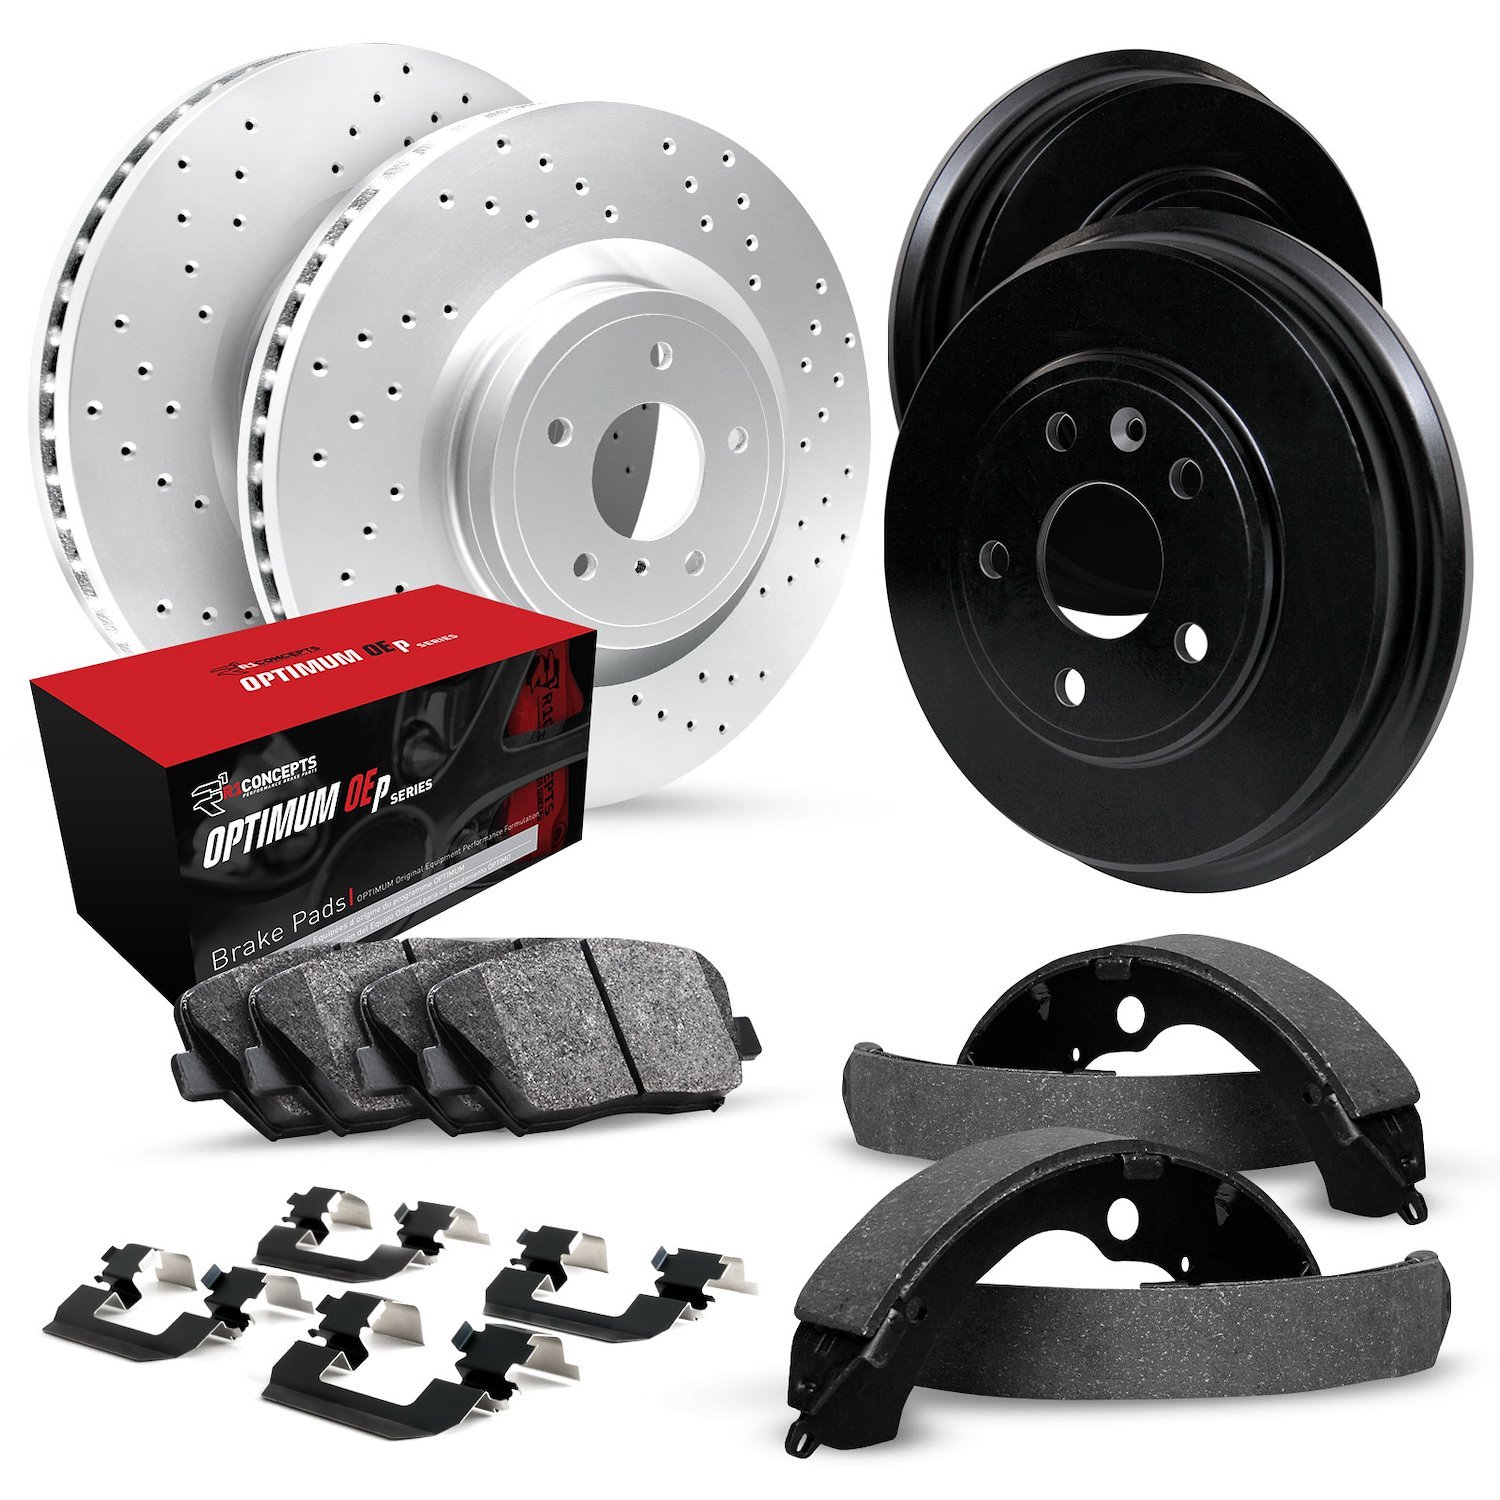 GEO-Carbon Drilled Brake Rotor & Drum Set w/Optimum OE Pads, Shoes, & Hardware, 1969-1972 GM, Position: Front & Rear